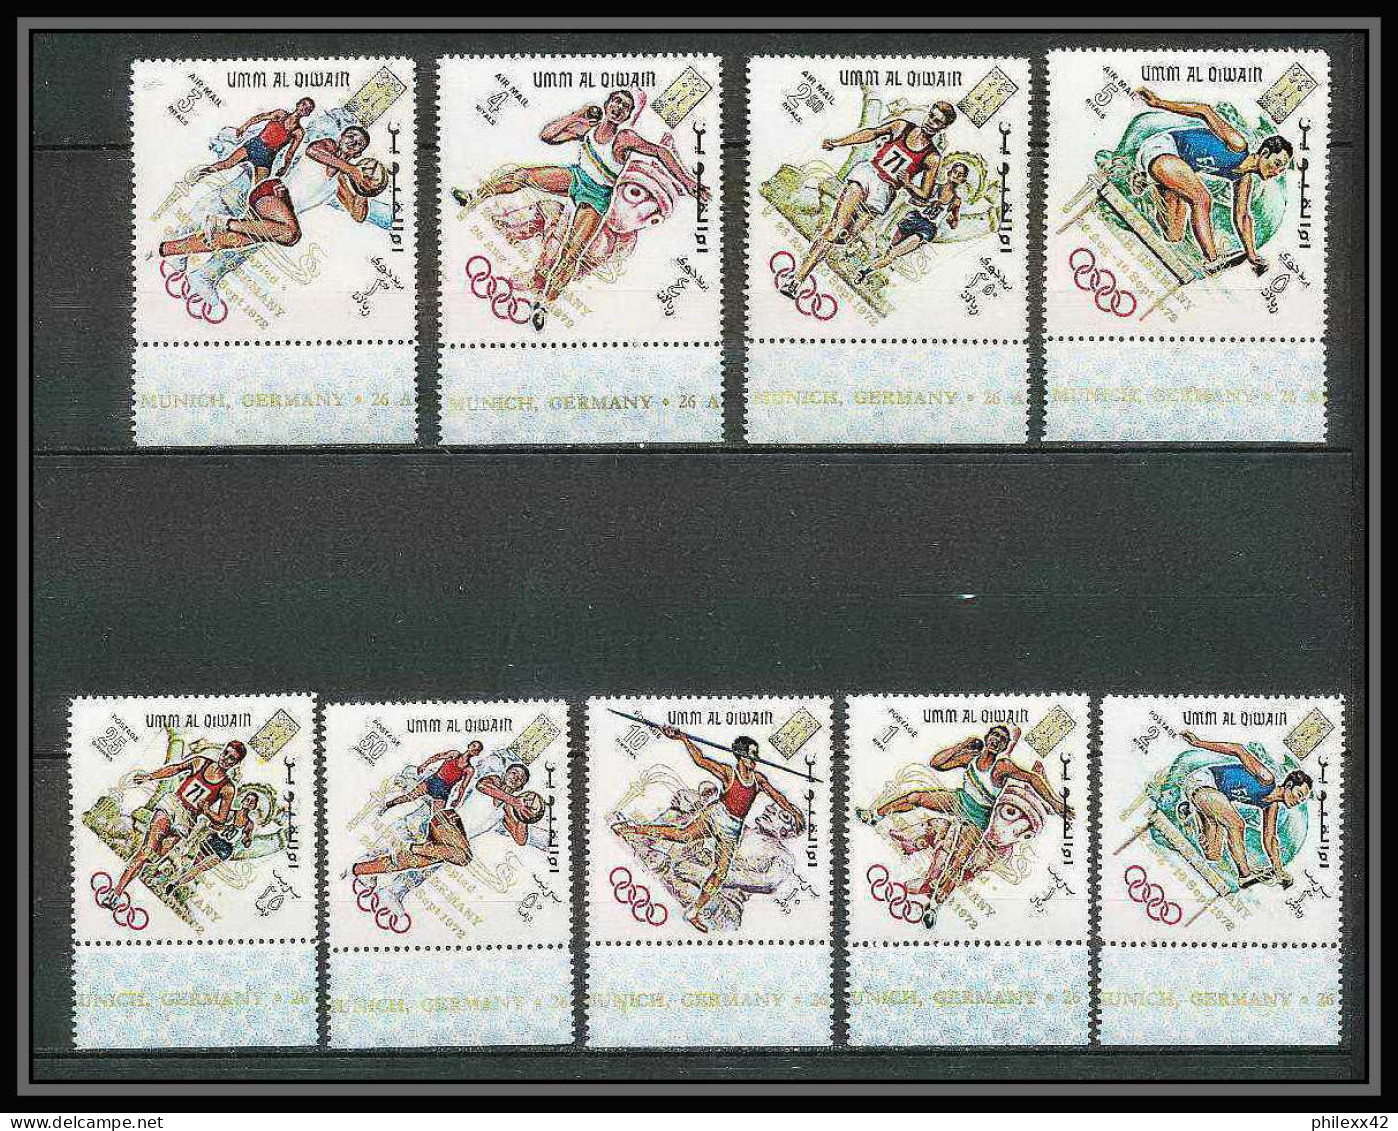 221 - Umm Al Qiwain MNH ** Mi N° 323 / 331 A Overprint Gold Jeux Olympiques Olympic Games MEXICO 68 Basket Javelin - Sommer 1968: Mexico